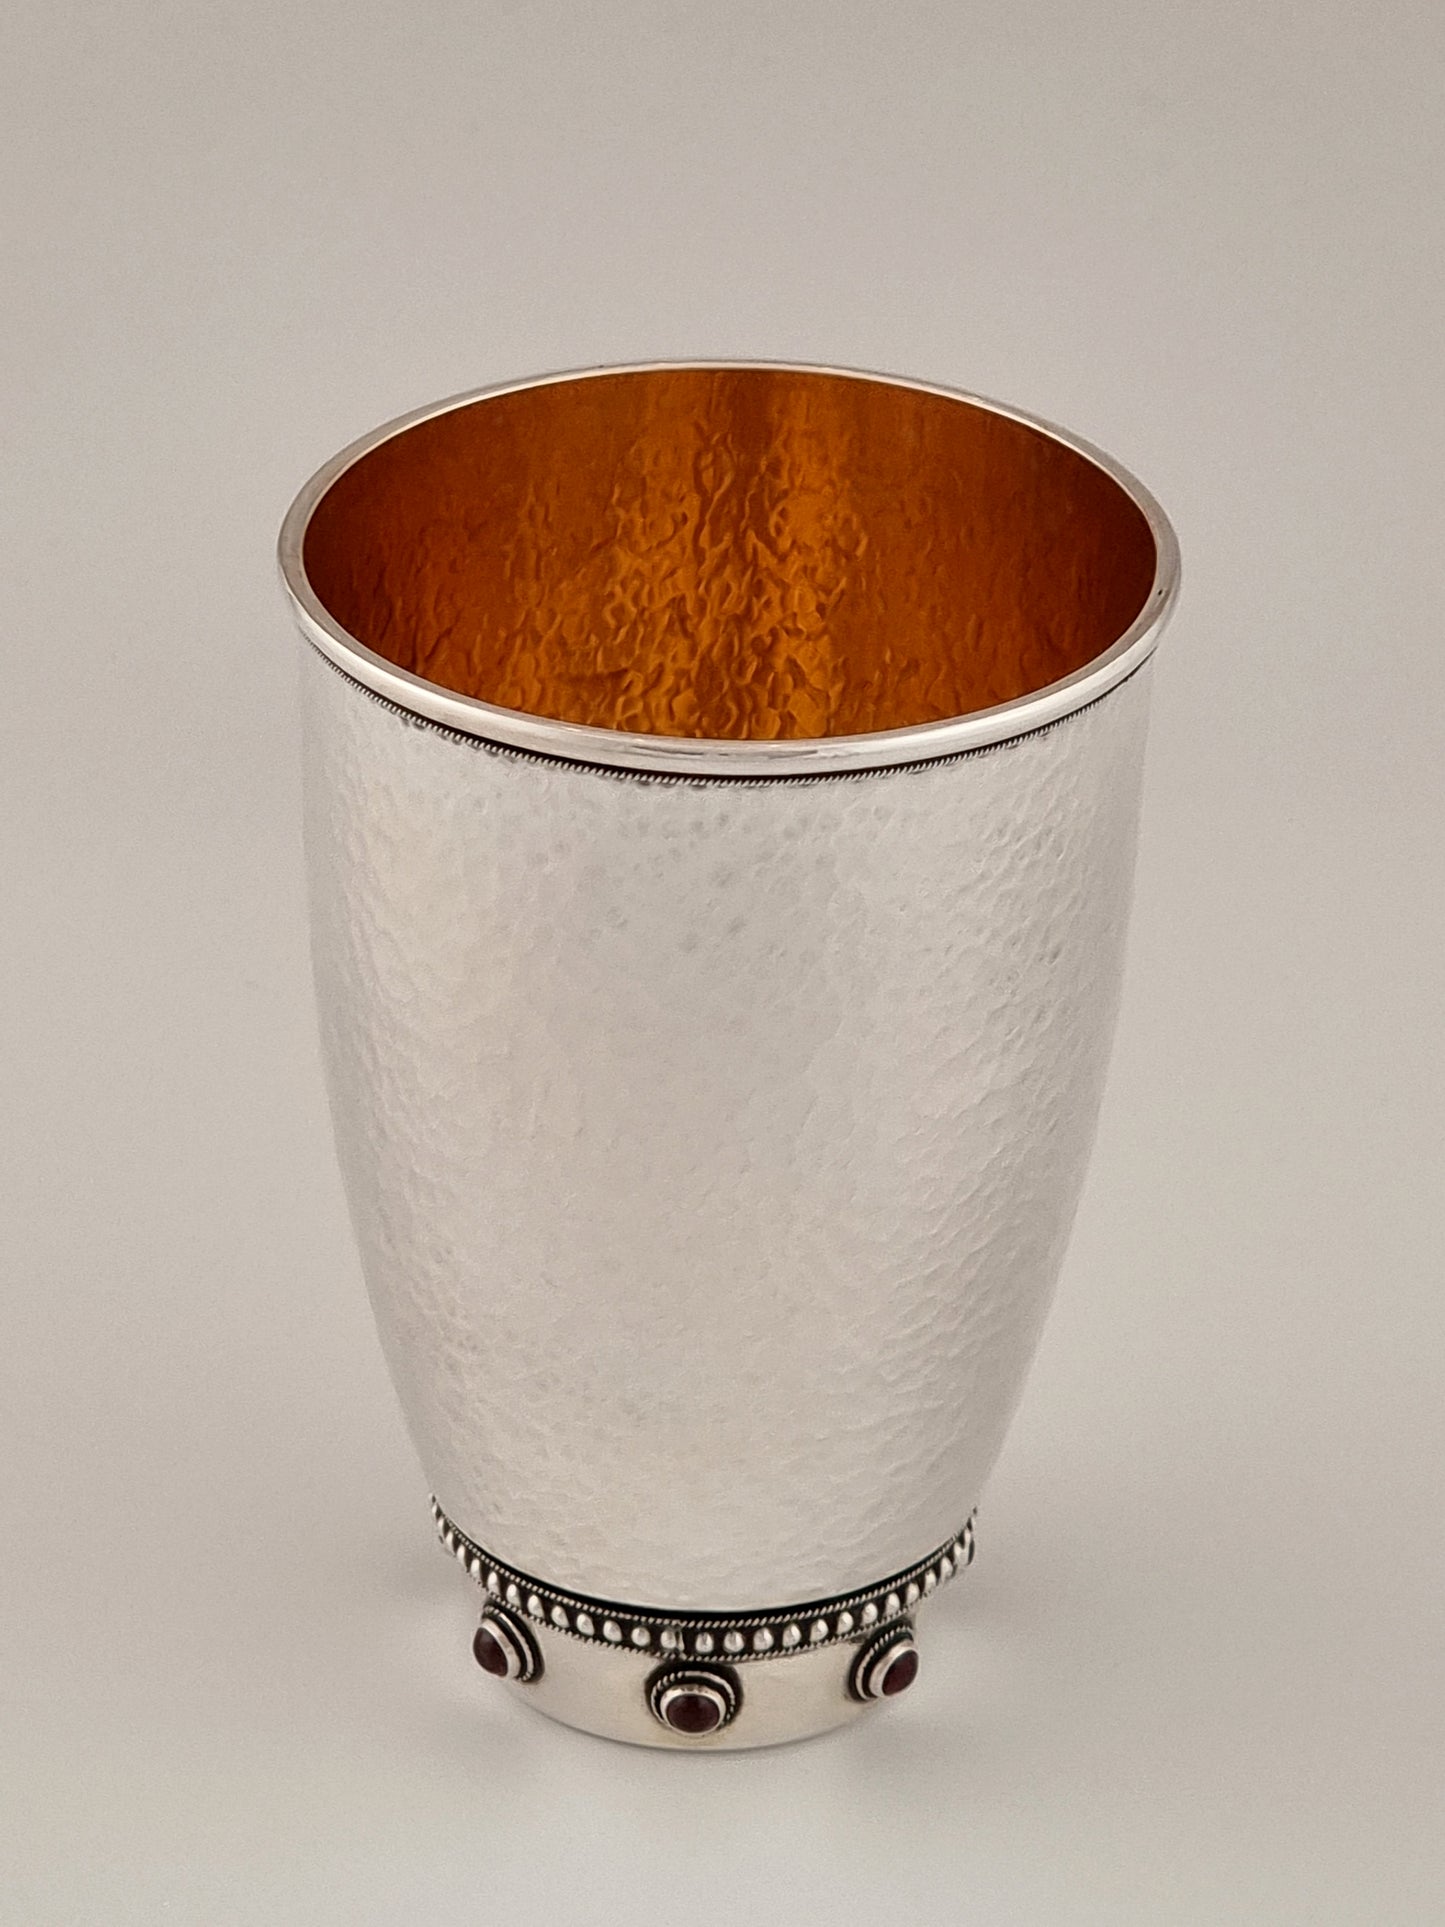 Sarah Kiddush Cup. This cup was designed in 1999. It is made of sterling silver, gold-plated silver on the inside, and adorned with seven garnet stones. It measures 4½" high.